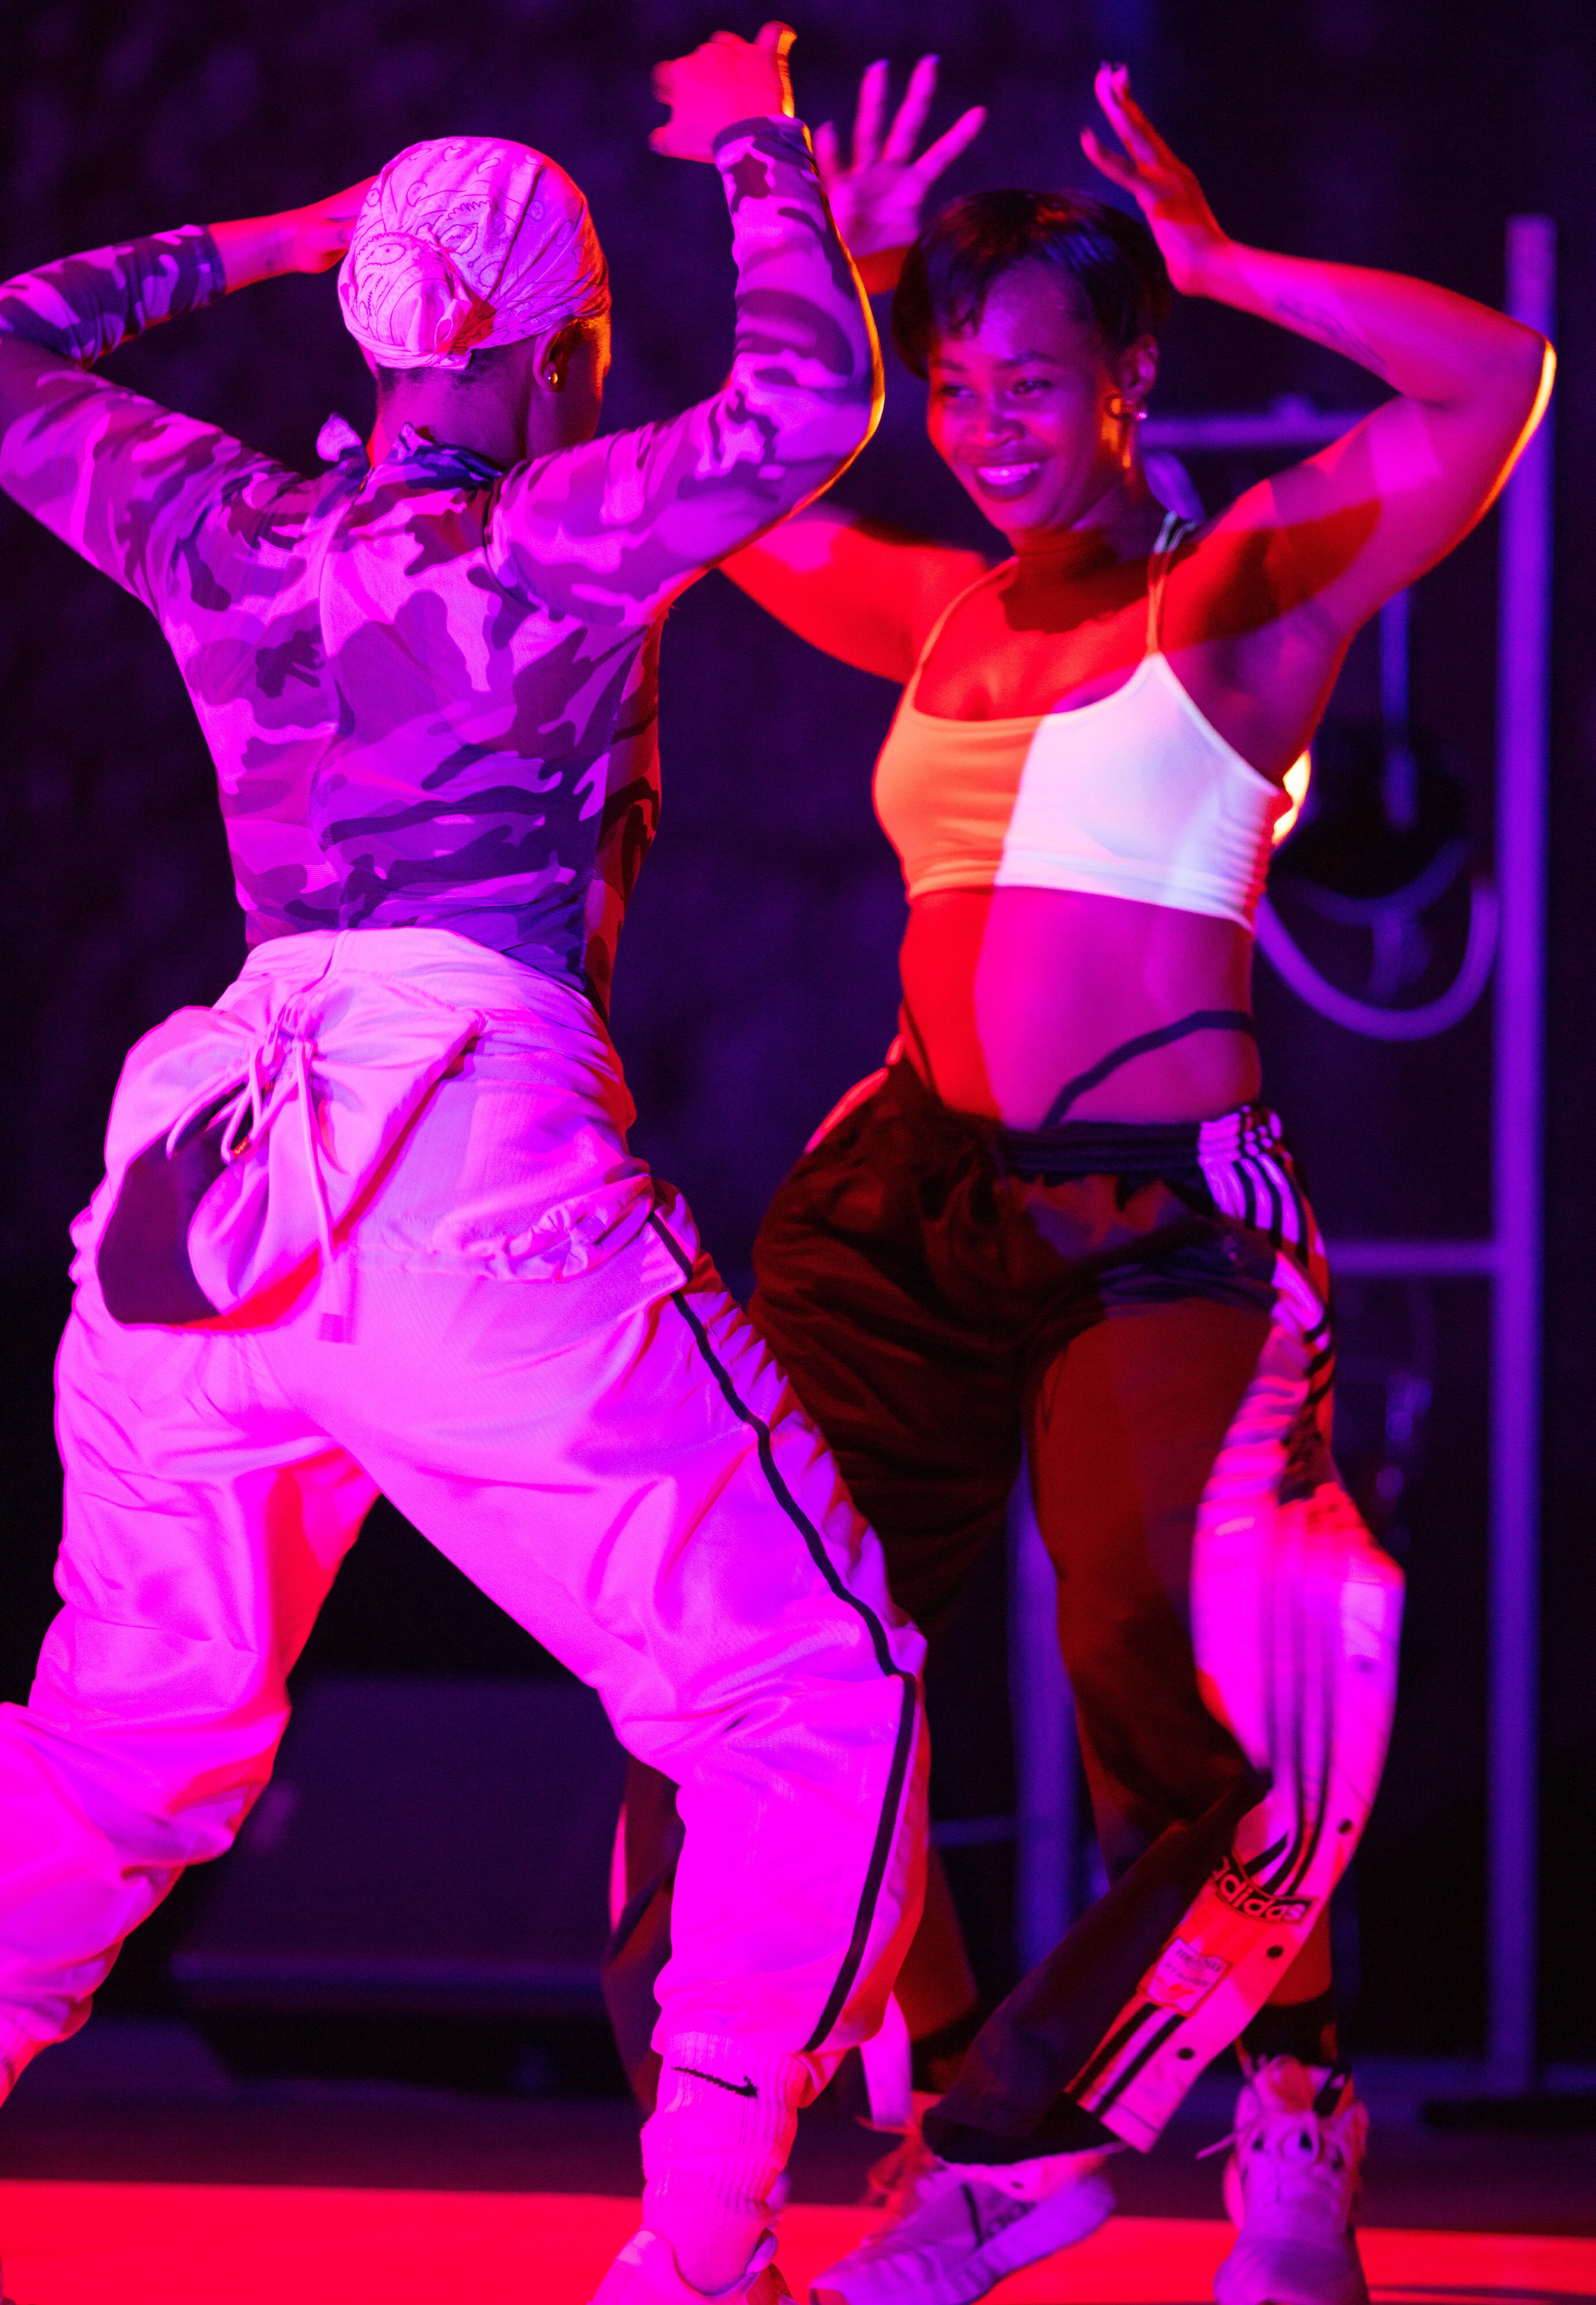 Two smiling dancers face each other, arms raised above their heads.